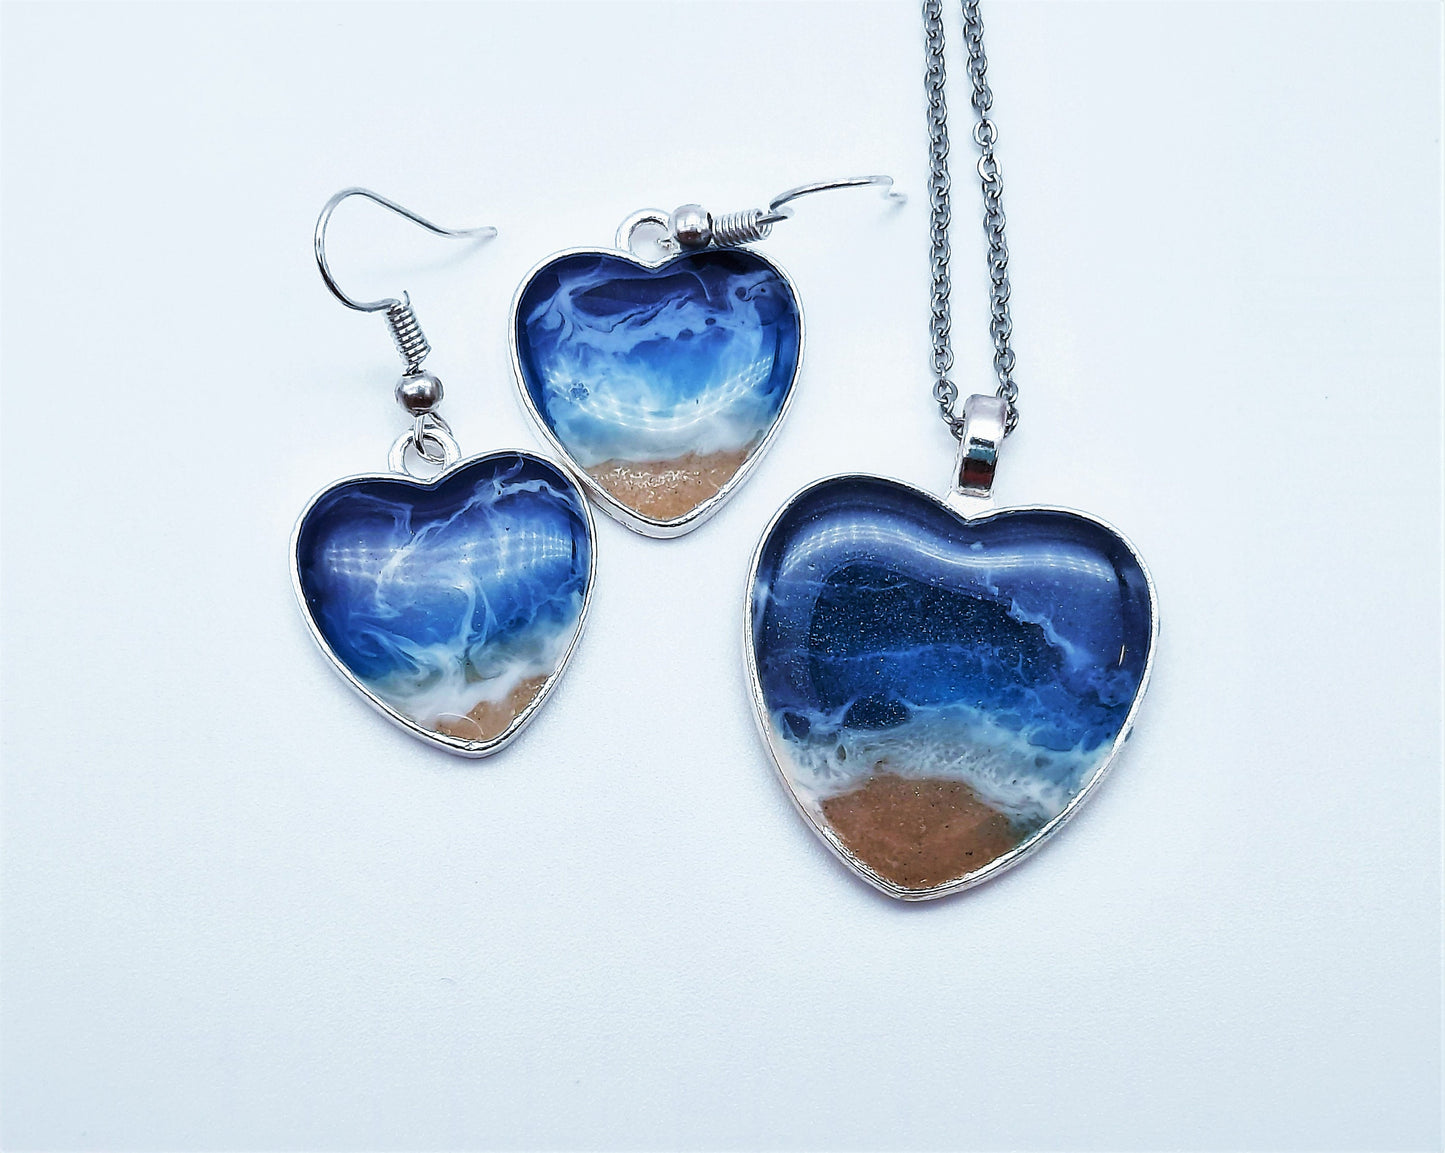 Resin Waves / Heart Shaped Ocean Earring and Necklace Set / Beach Scene / Made with Sand, Resin, Mica, & Hypoallergenic Stainless Steel